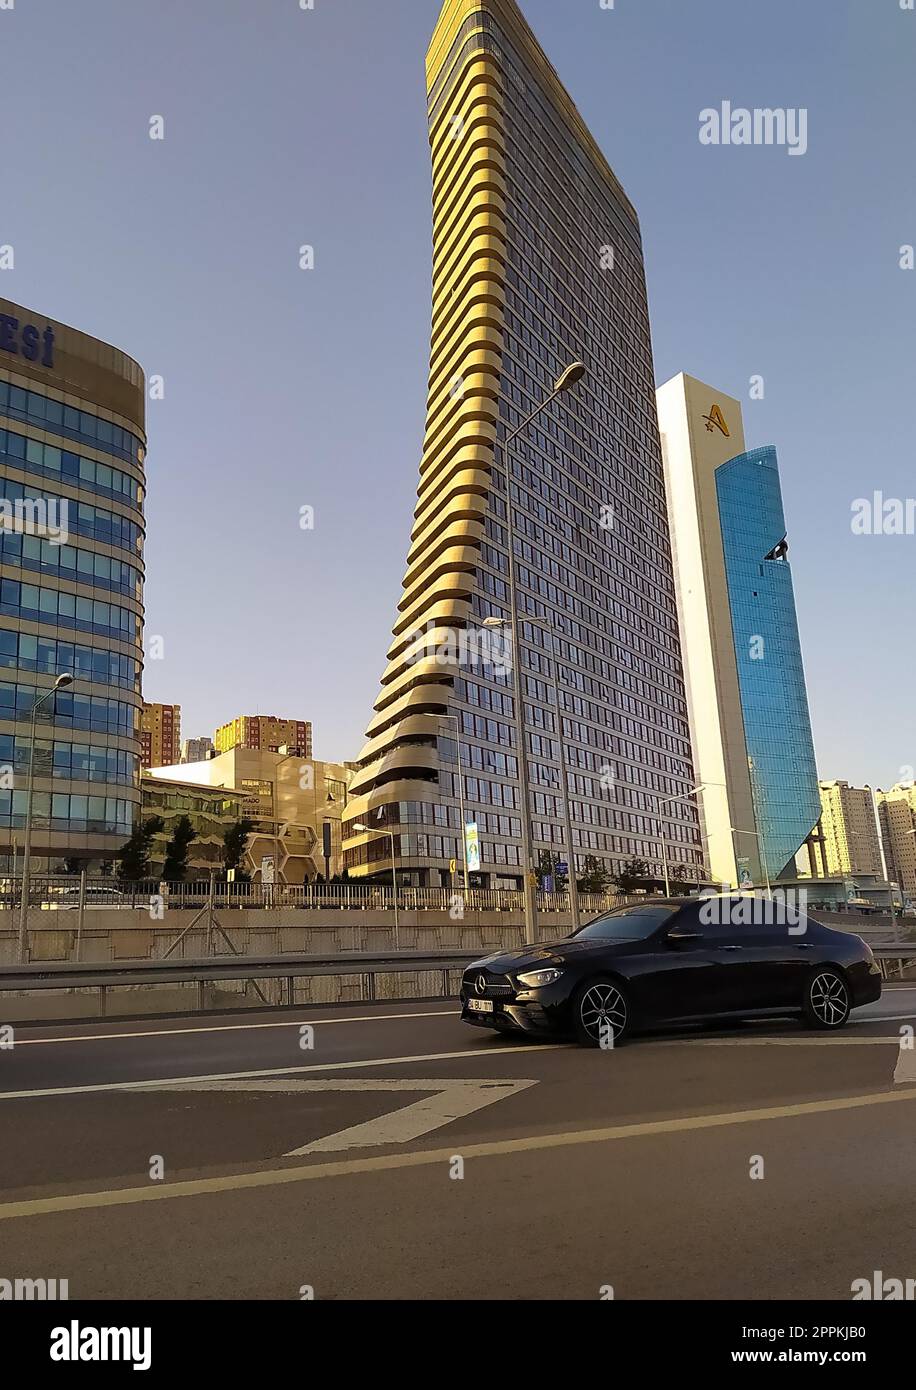 Atasehir, Istanbul, Turkey - September 16, 2022: Glass facade residences. Big skyscrapers. Giant glass buildings in the city. Fenerbahce University Stock Photo